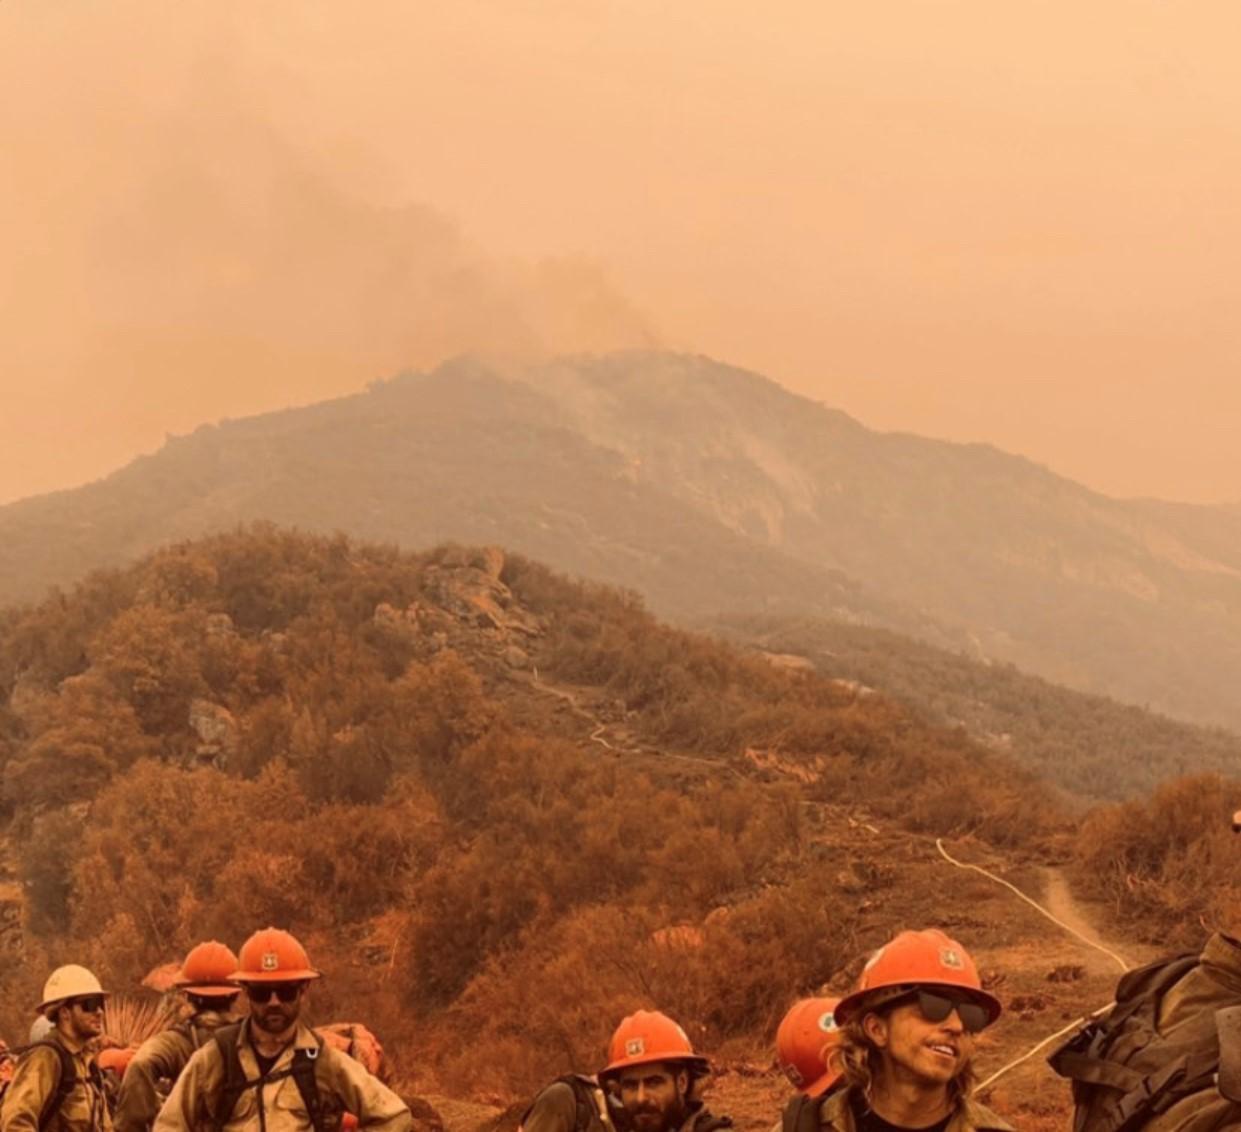 A crew stands in line on a smoky day in front of a mountain with a hose weaving up the hillside along a trail